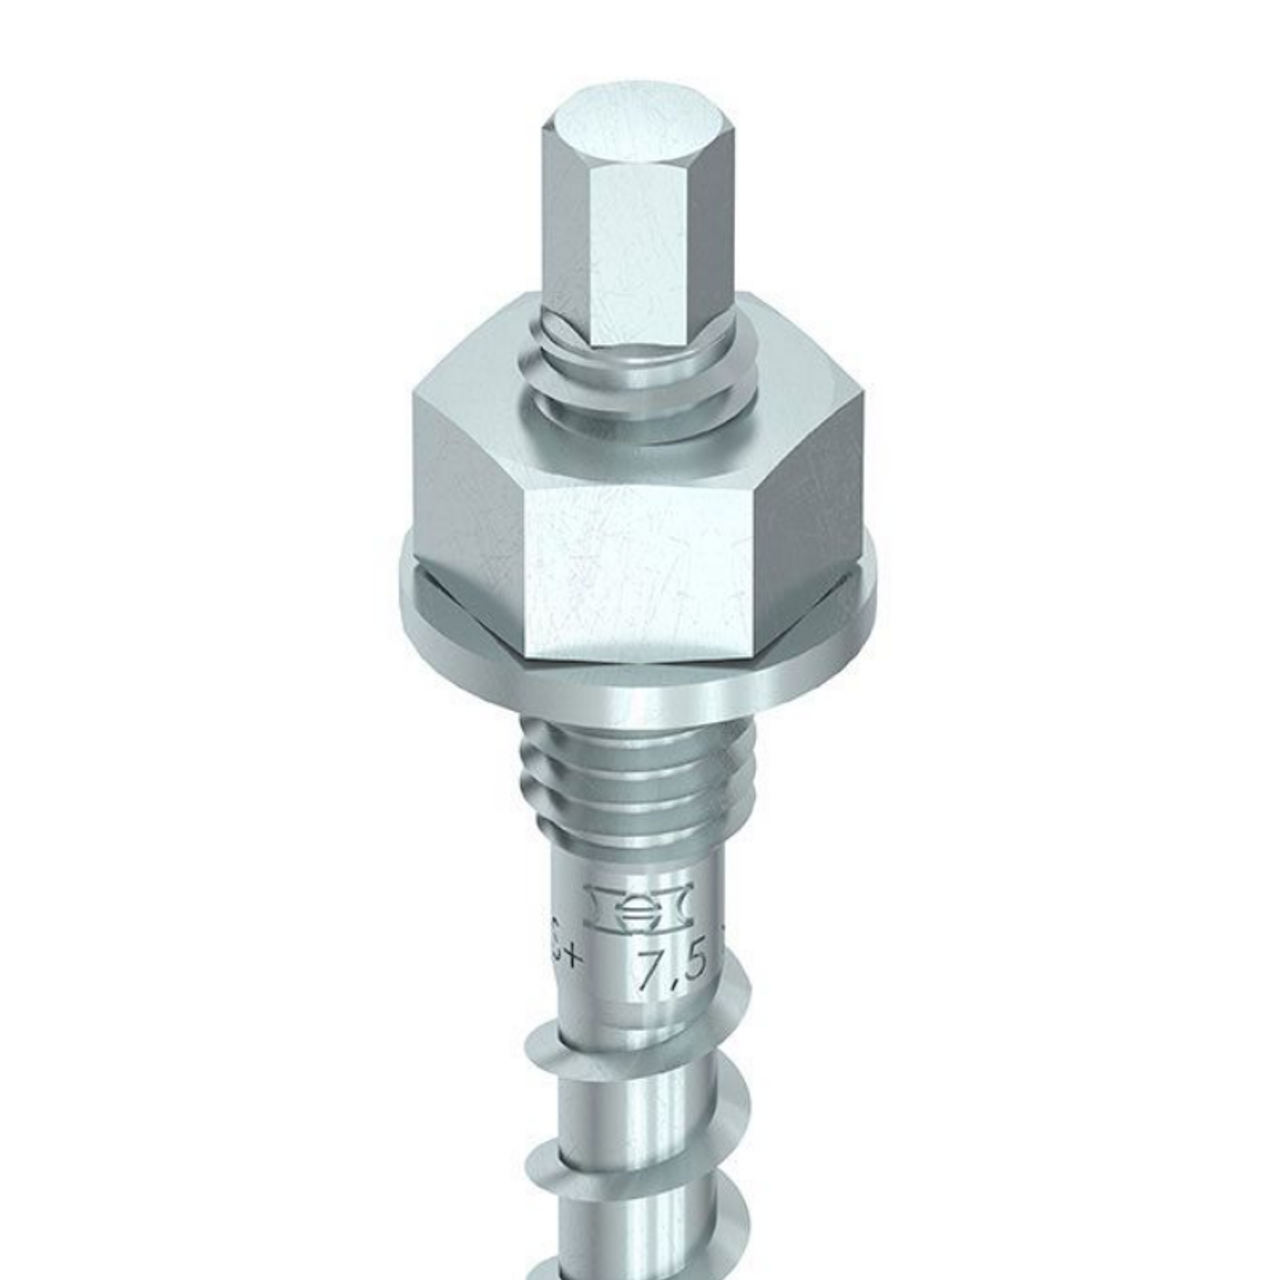 Craftsman Hardware supplies HECO 10mm Silver Zinc Pre-Set Threaded Screw Anchor with Silver Zinc for the Construction Industry and Installers in Glen Waverley, Bayswater and Mitcham